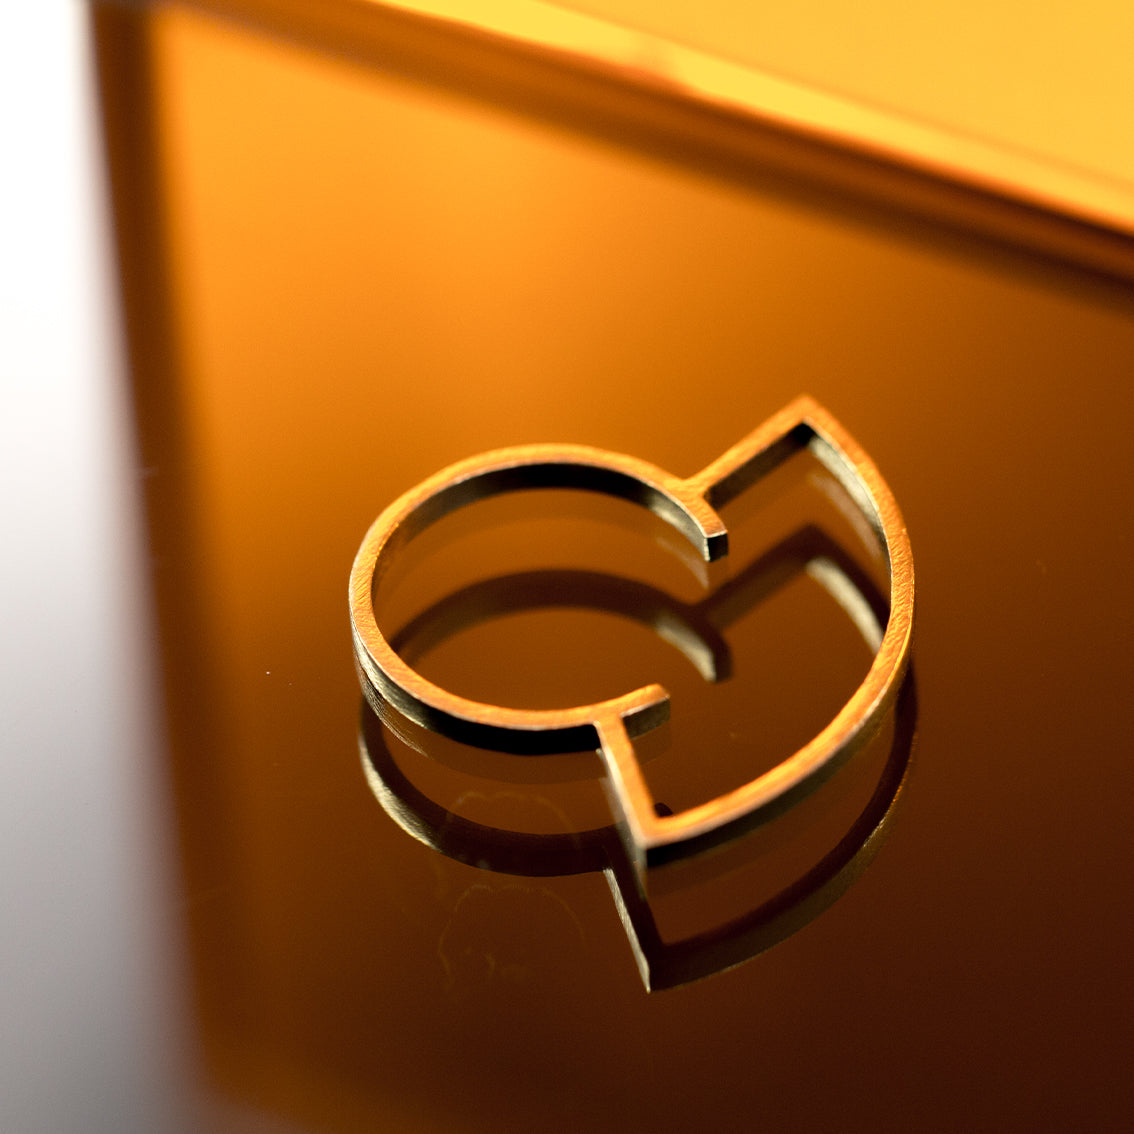 A gold coloured brass ring on an orange background which is designed as a silhouette and has a very thin band. It's very light, contemporary, playful yet an elegant design.